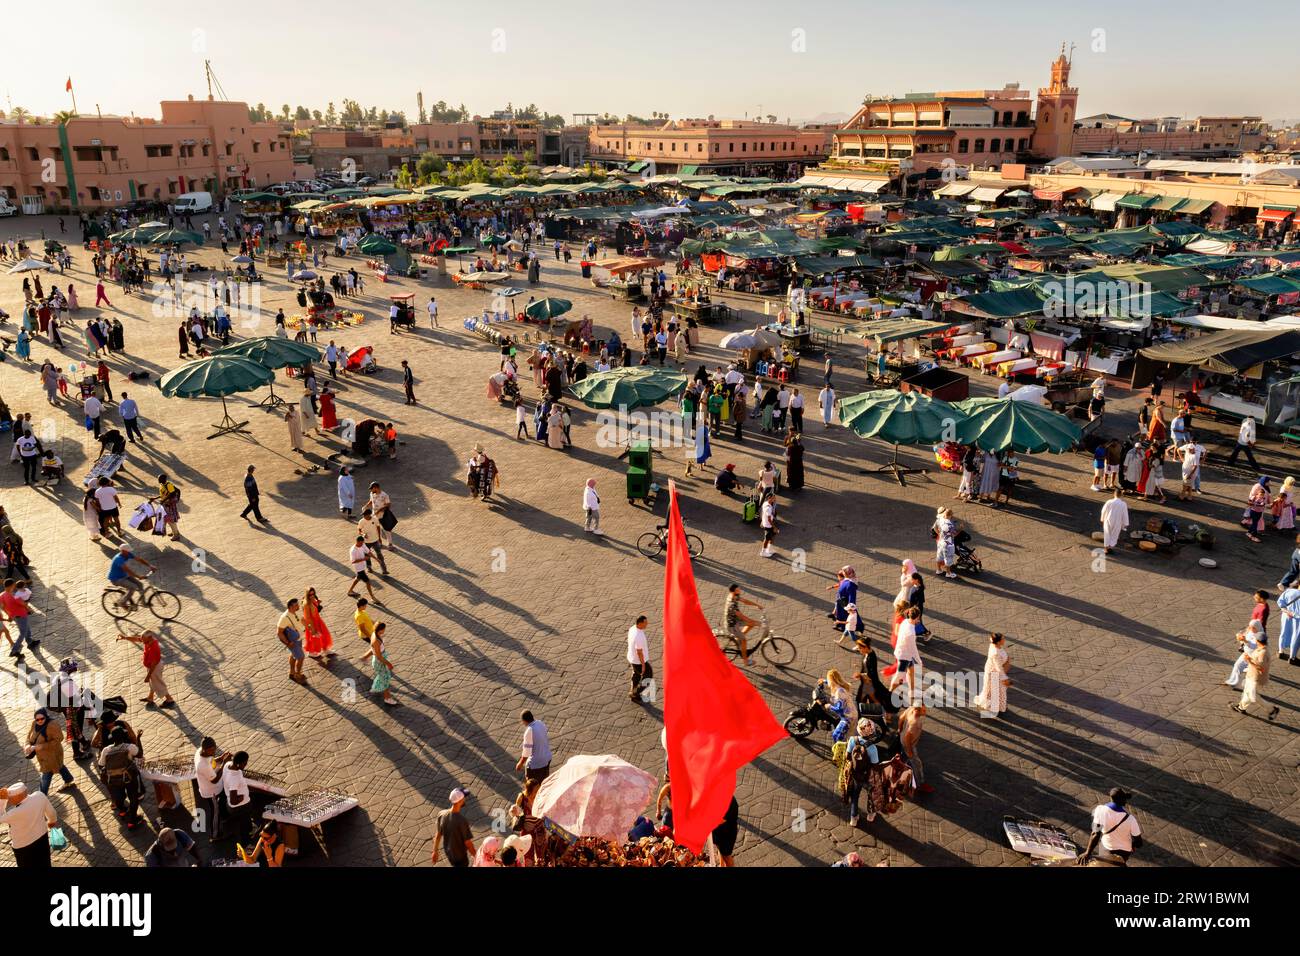 Sunset aerial view of Jemaa el-Fnaa square. Unesco world heritage site inside the Marrakech or Marrakesh Medina, Morocco. Stock Photo